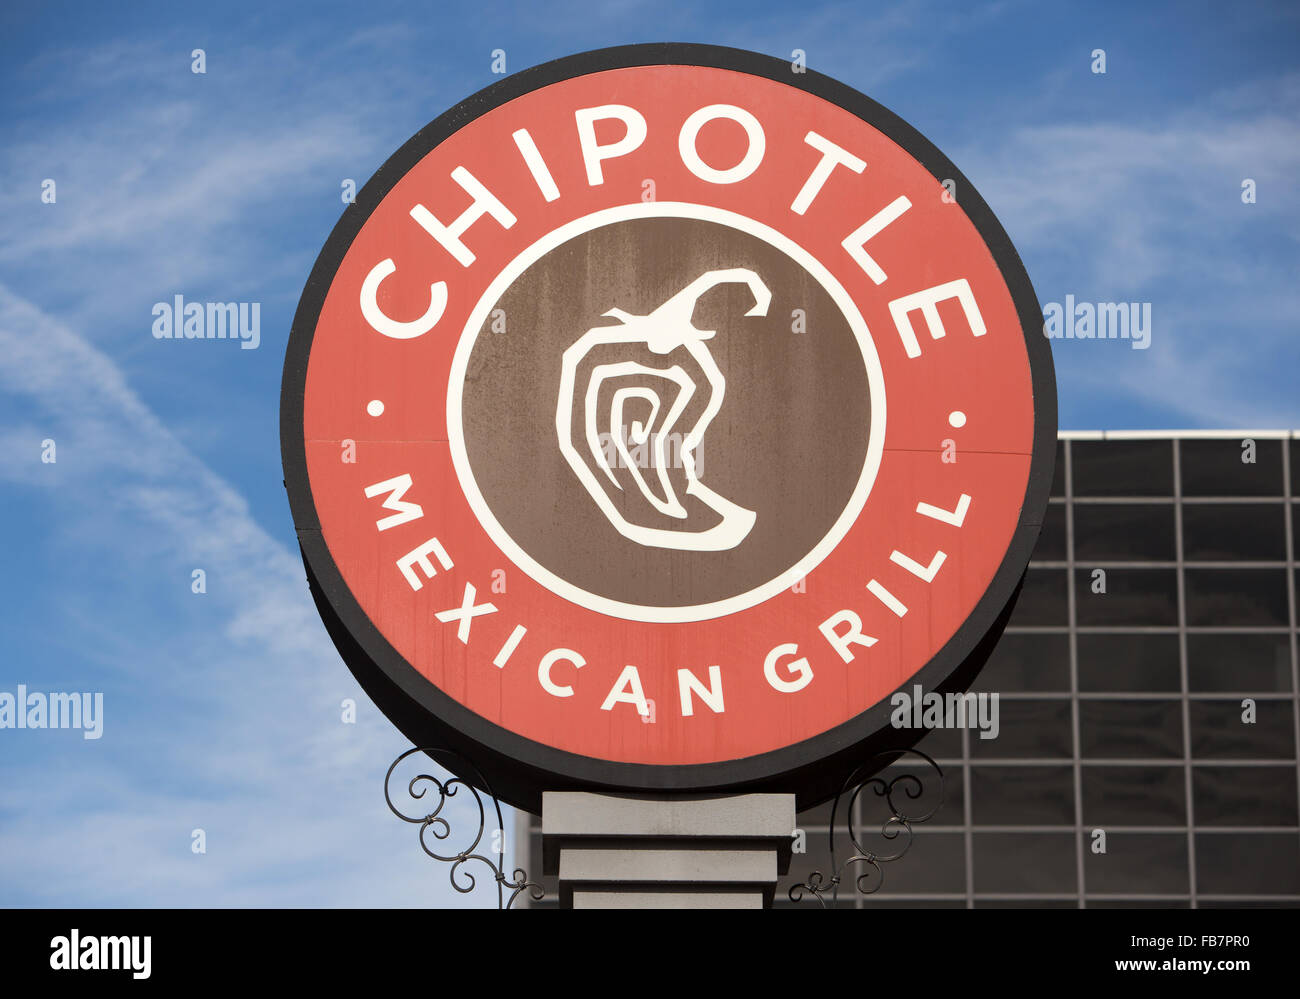 The Chipotle Mexican Grill sign. Stock Photo